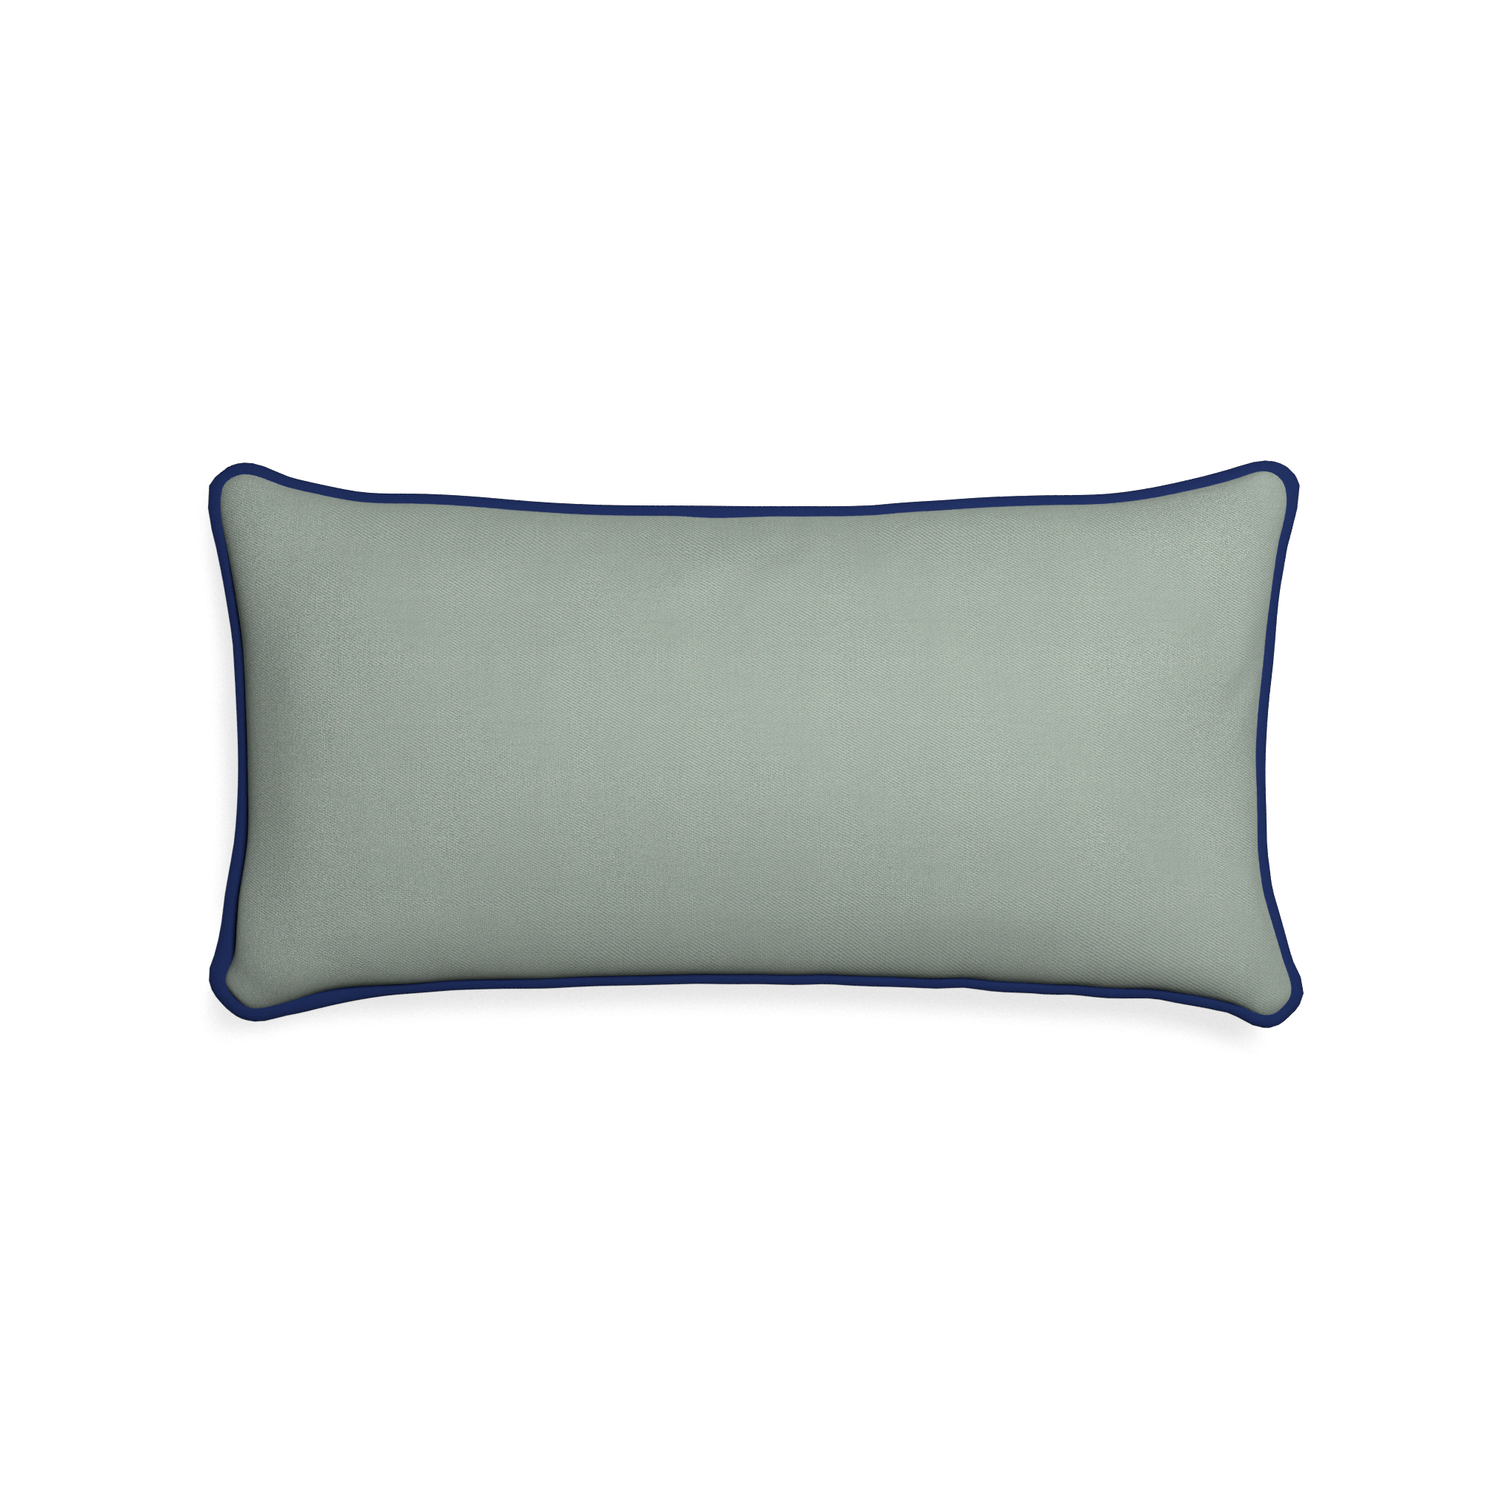 Midi-lumbar sage custom sage green cottonpillow with midnight piping on white background